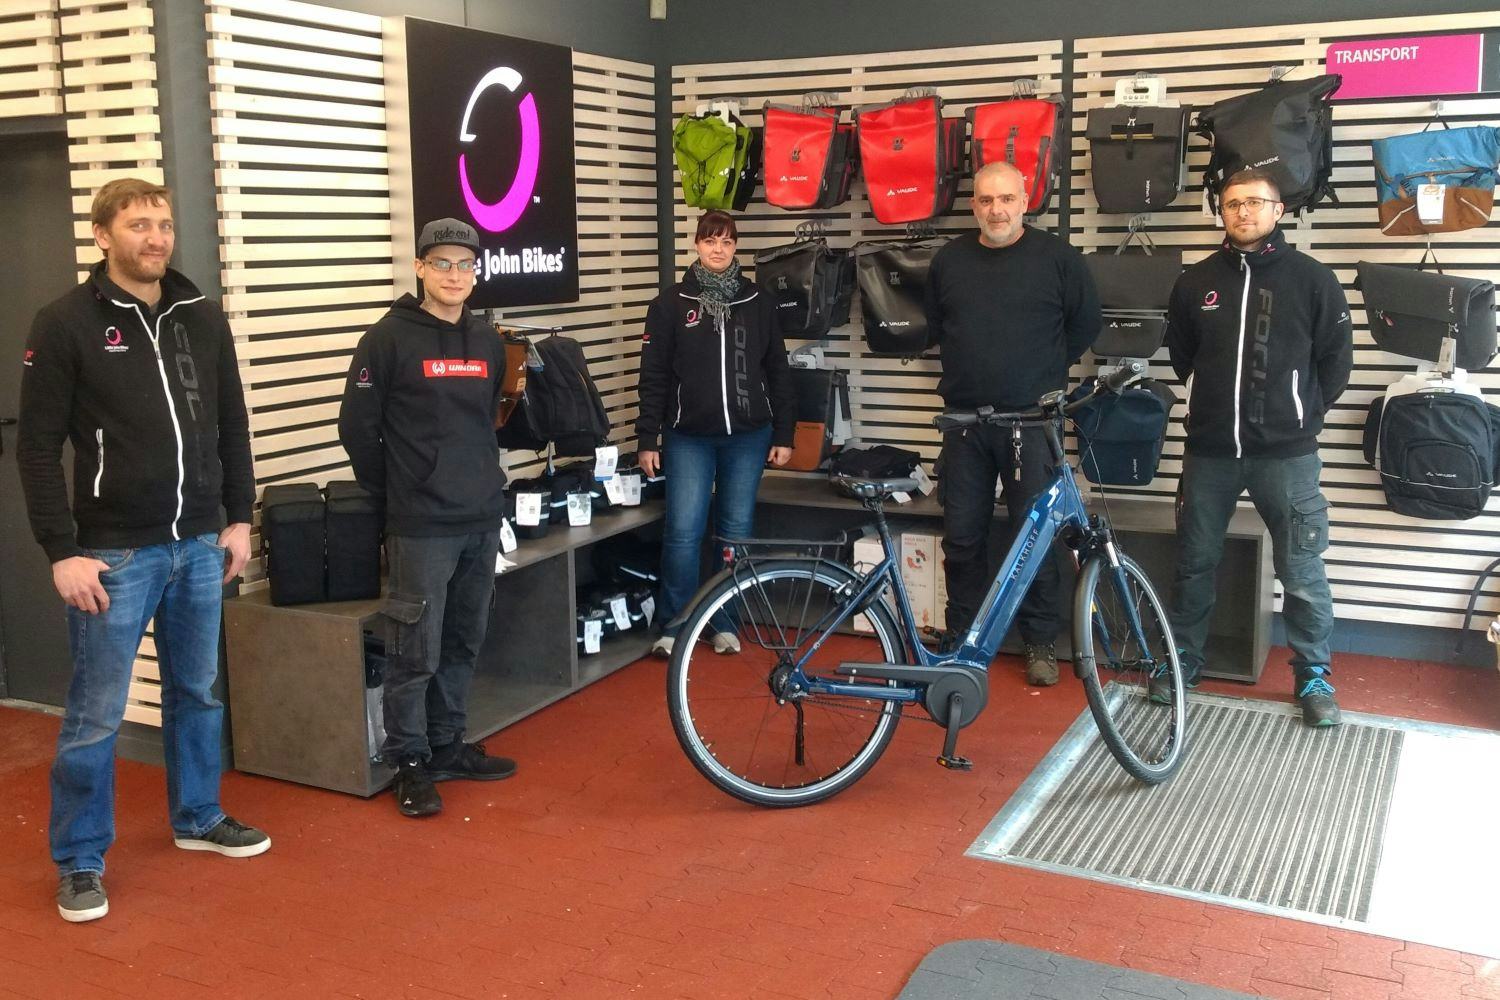 Little John Bike's 40th store is a takeover of an IBD in Greifswald where the team is pleased to continue operations under the new company banner. - Photo Little John Bikes